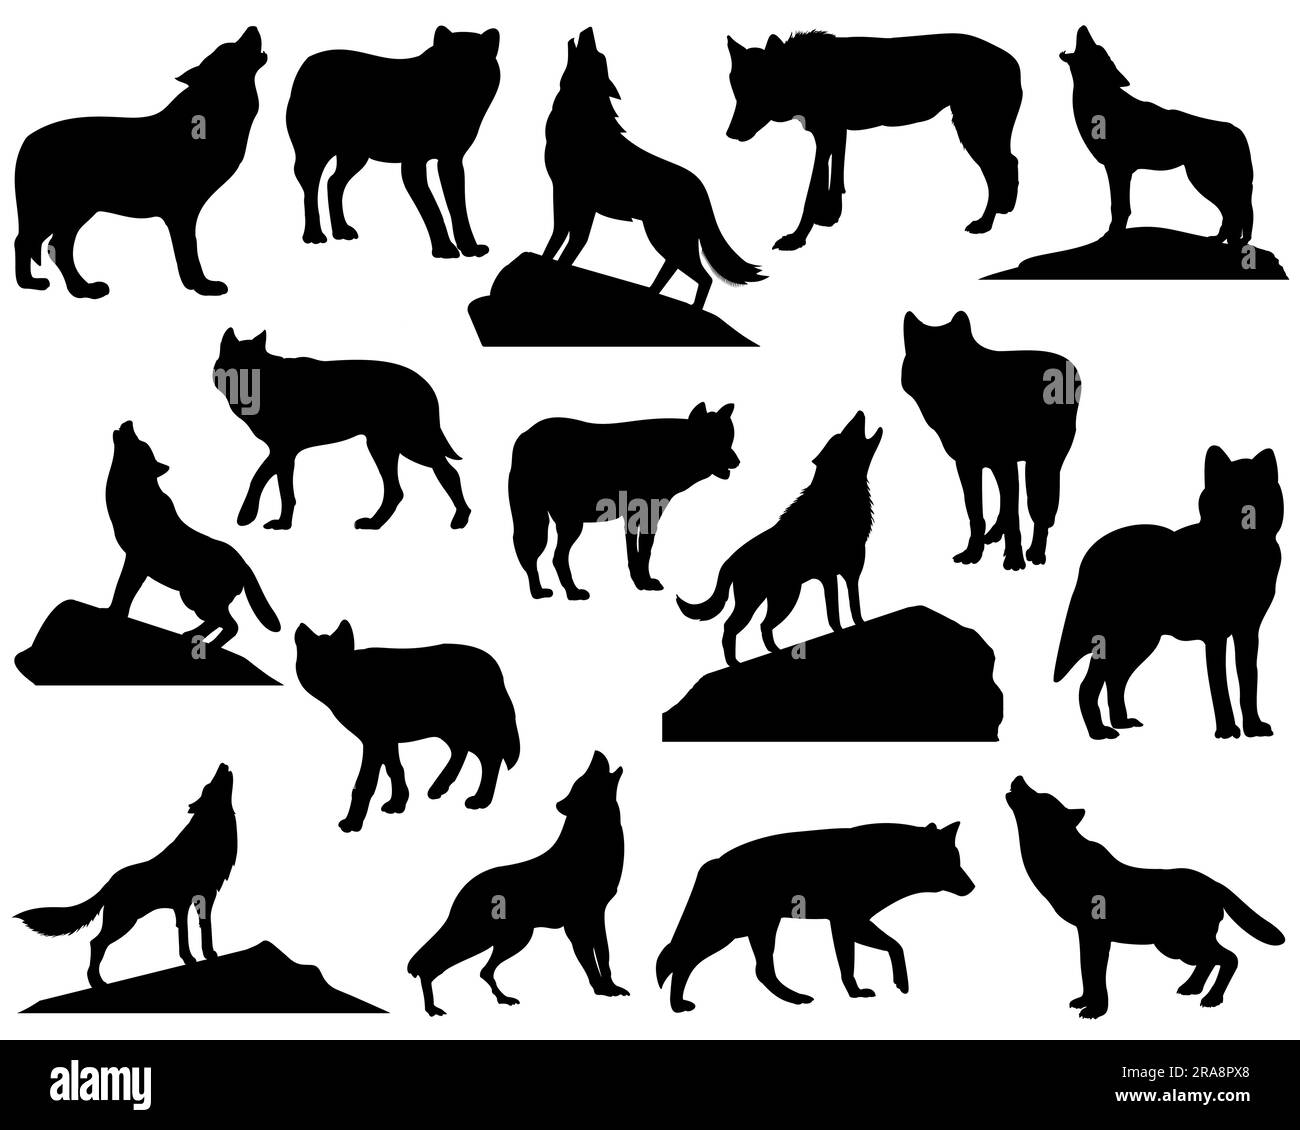 Set of Howling Wolf Silhouette Vector Art on White Background Stock Vector